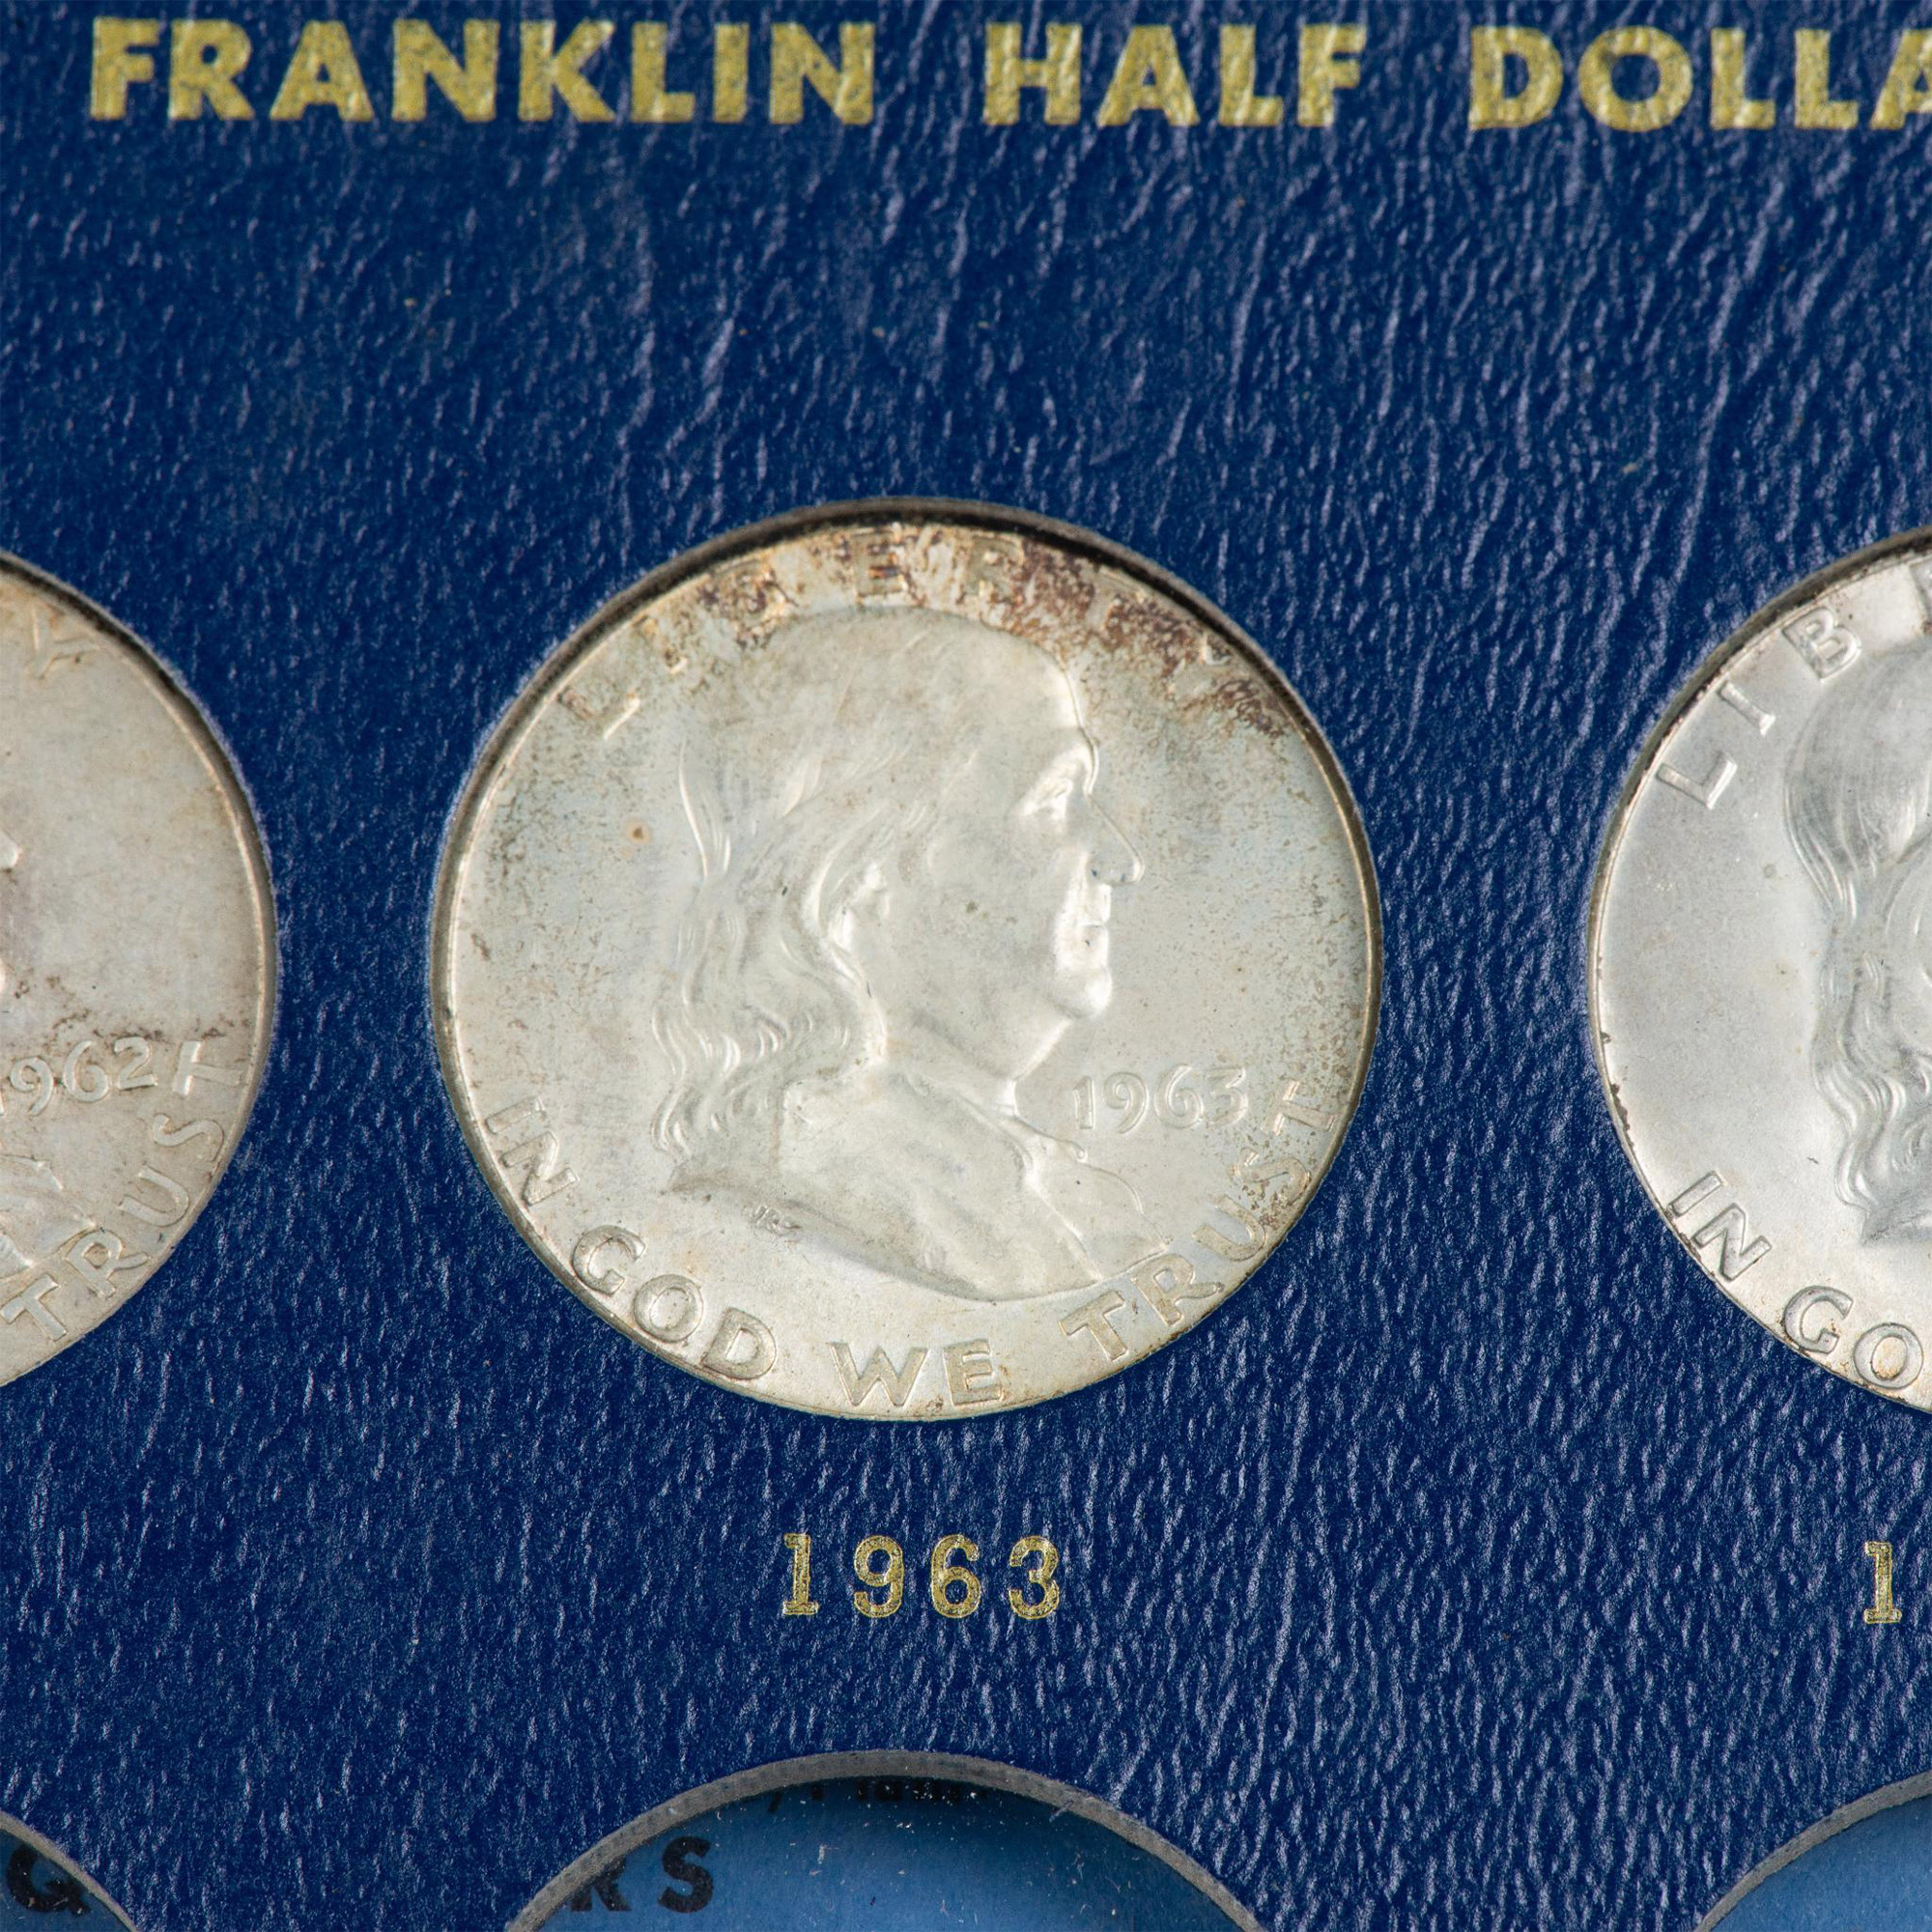 1 BOOK OF US FRANKLIN HALF DOLLAR COINS 1948-1963 - Image 8 of 9